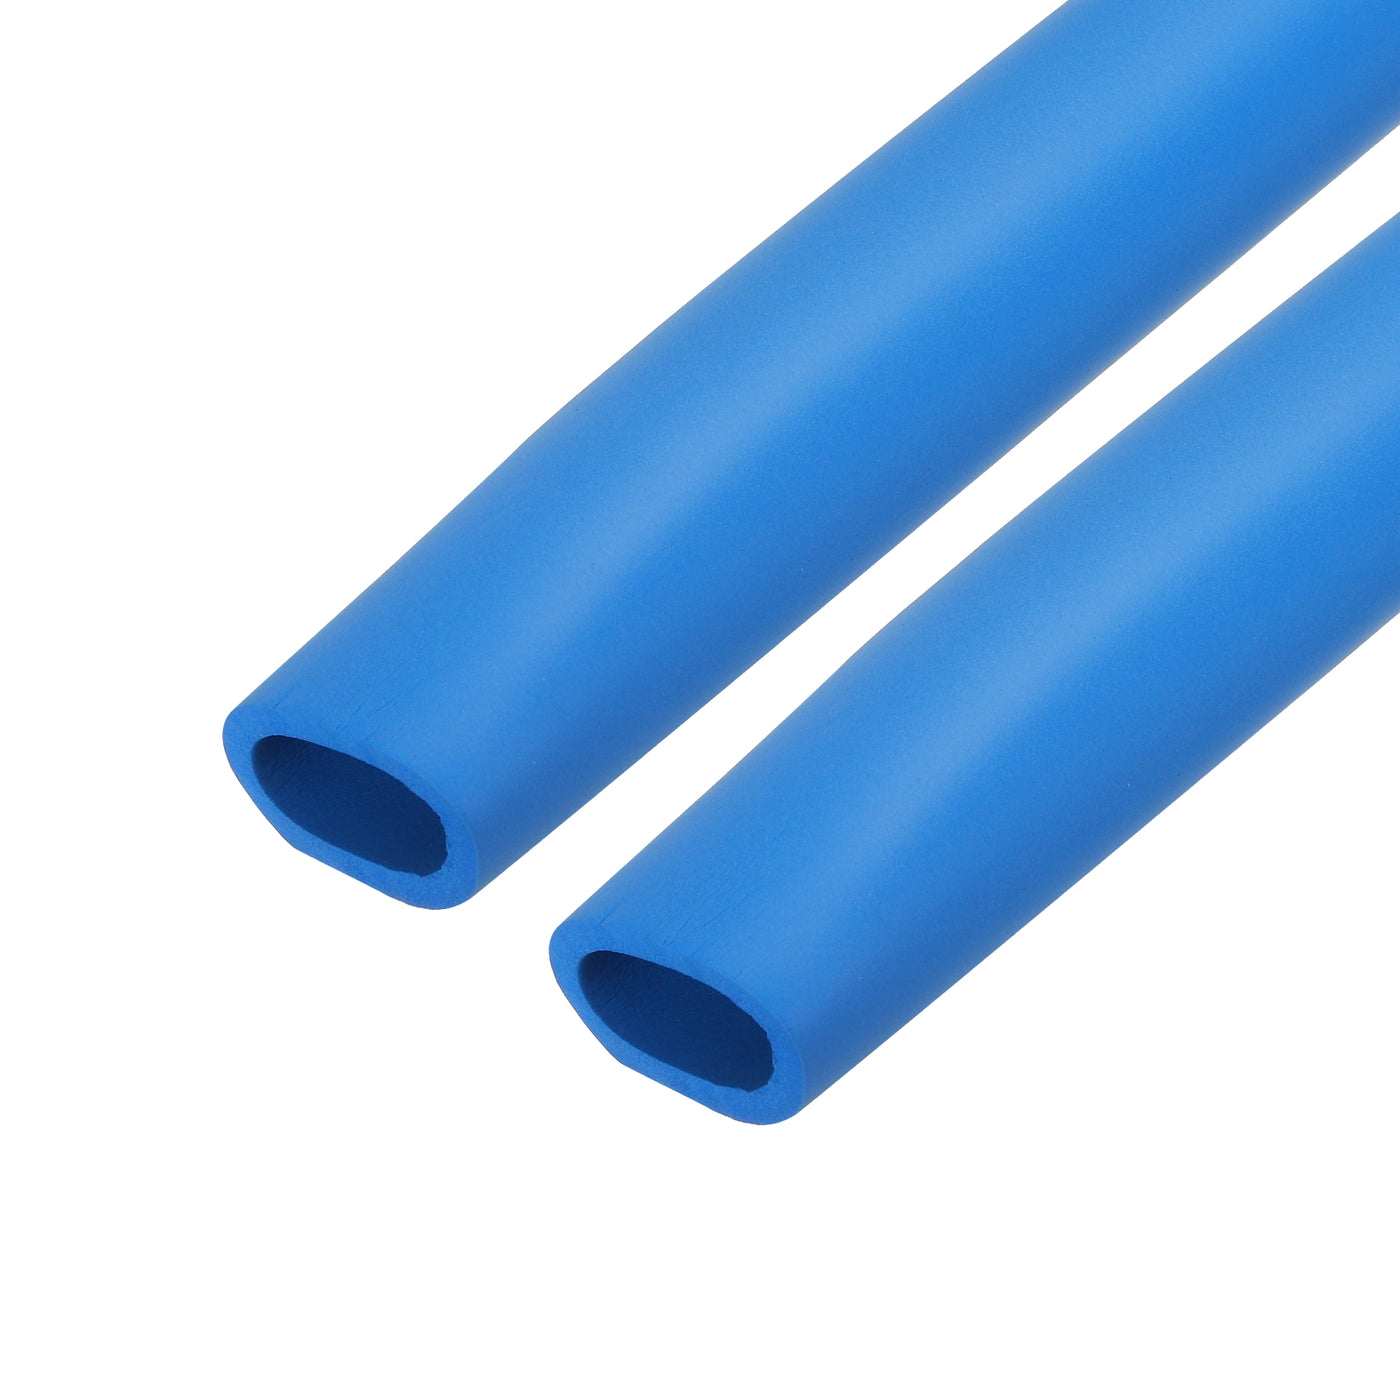 uxcell Uxcell 2pcs 3.3ft Pipe Insulation Tube 28mm ID 38mm OD Foam Tubing for Handle Grip Support, Blue